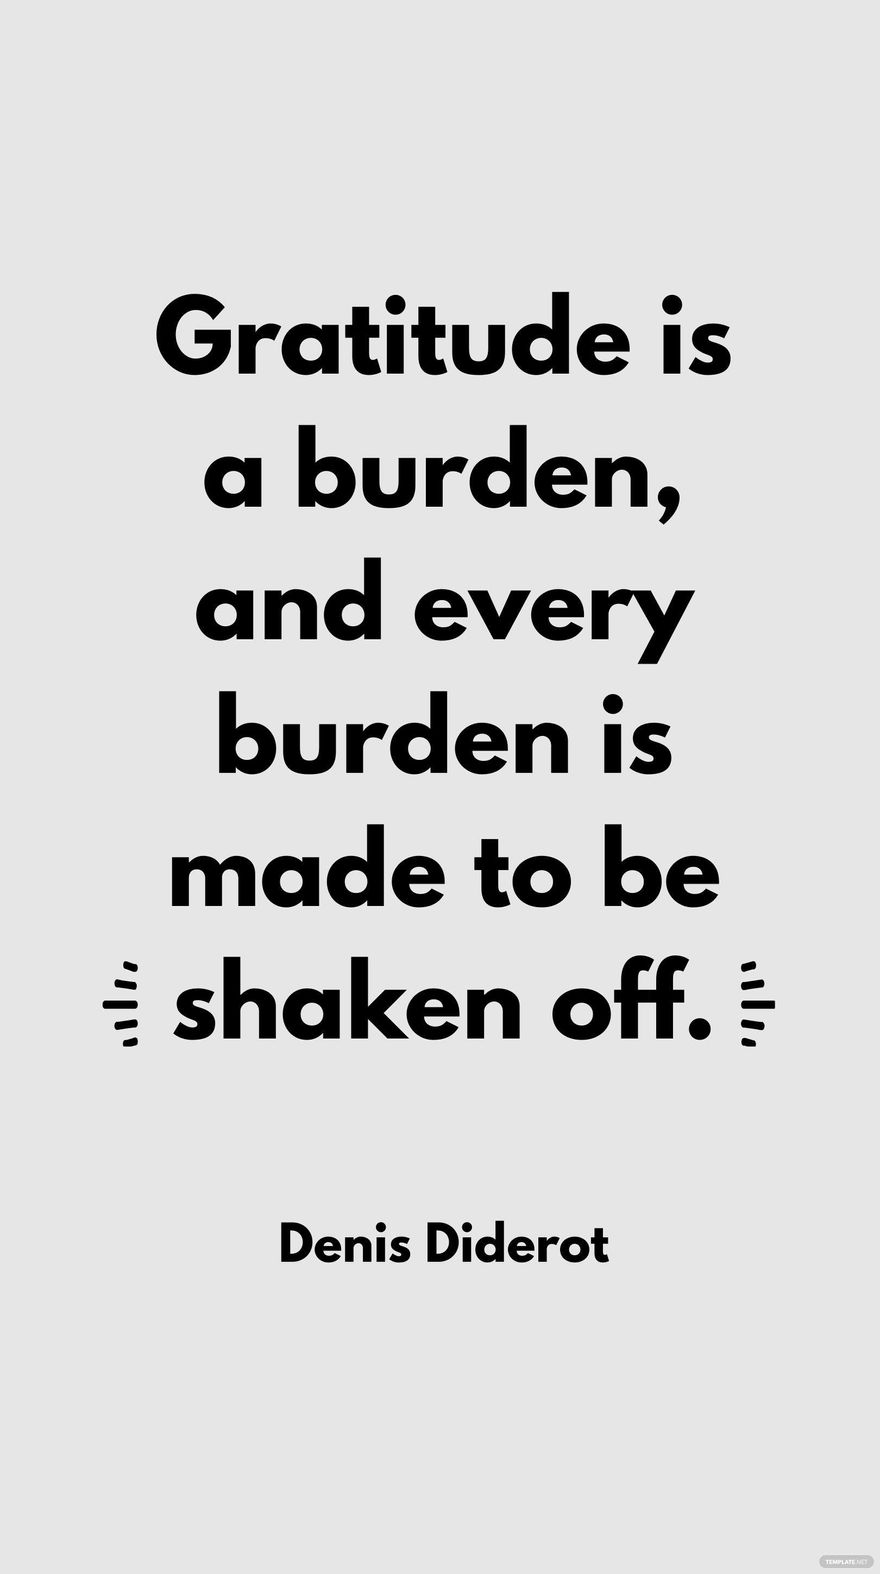 Denis Diderot - Gratitude is a burden, and every burden is made to be shaken off.